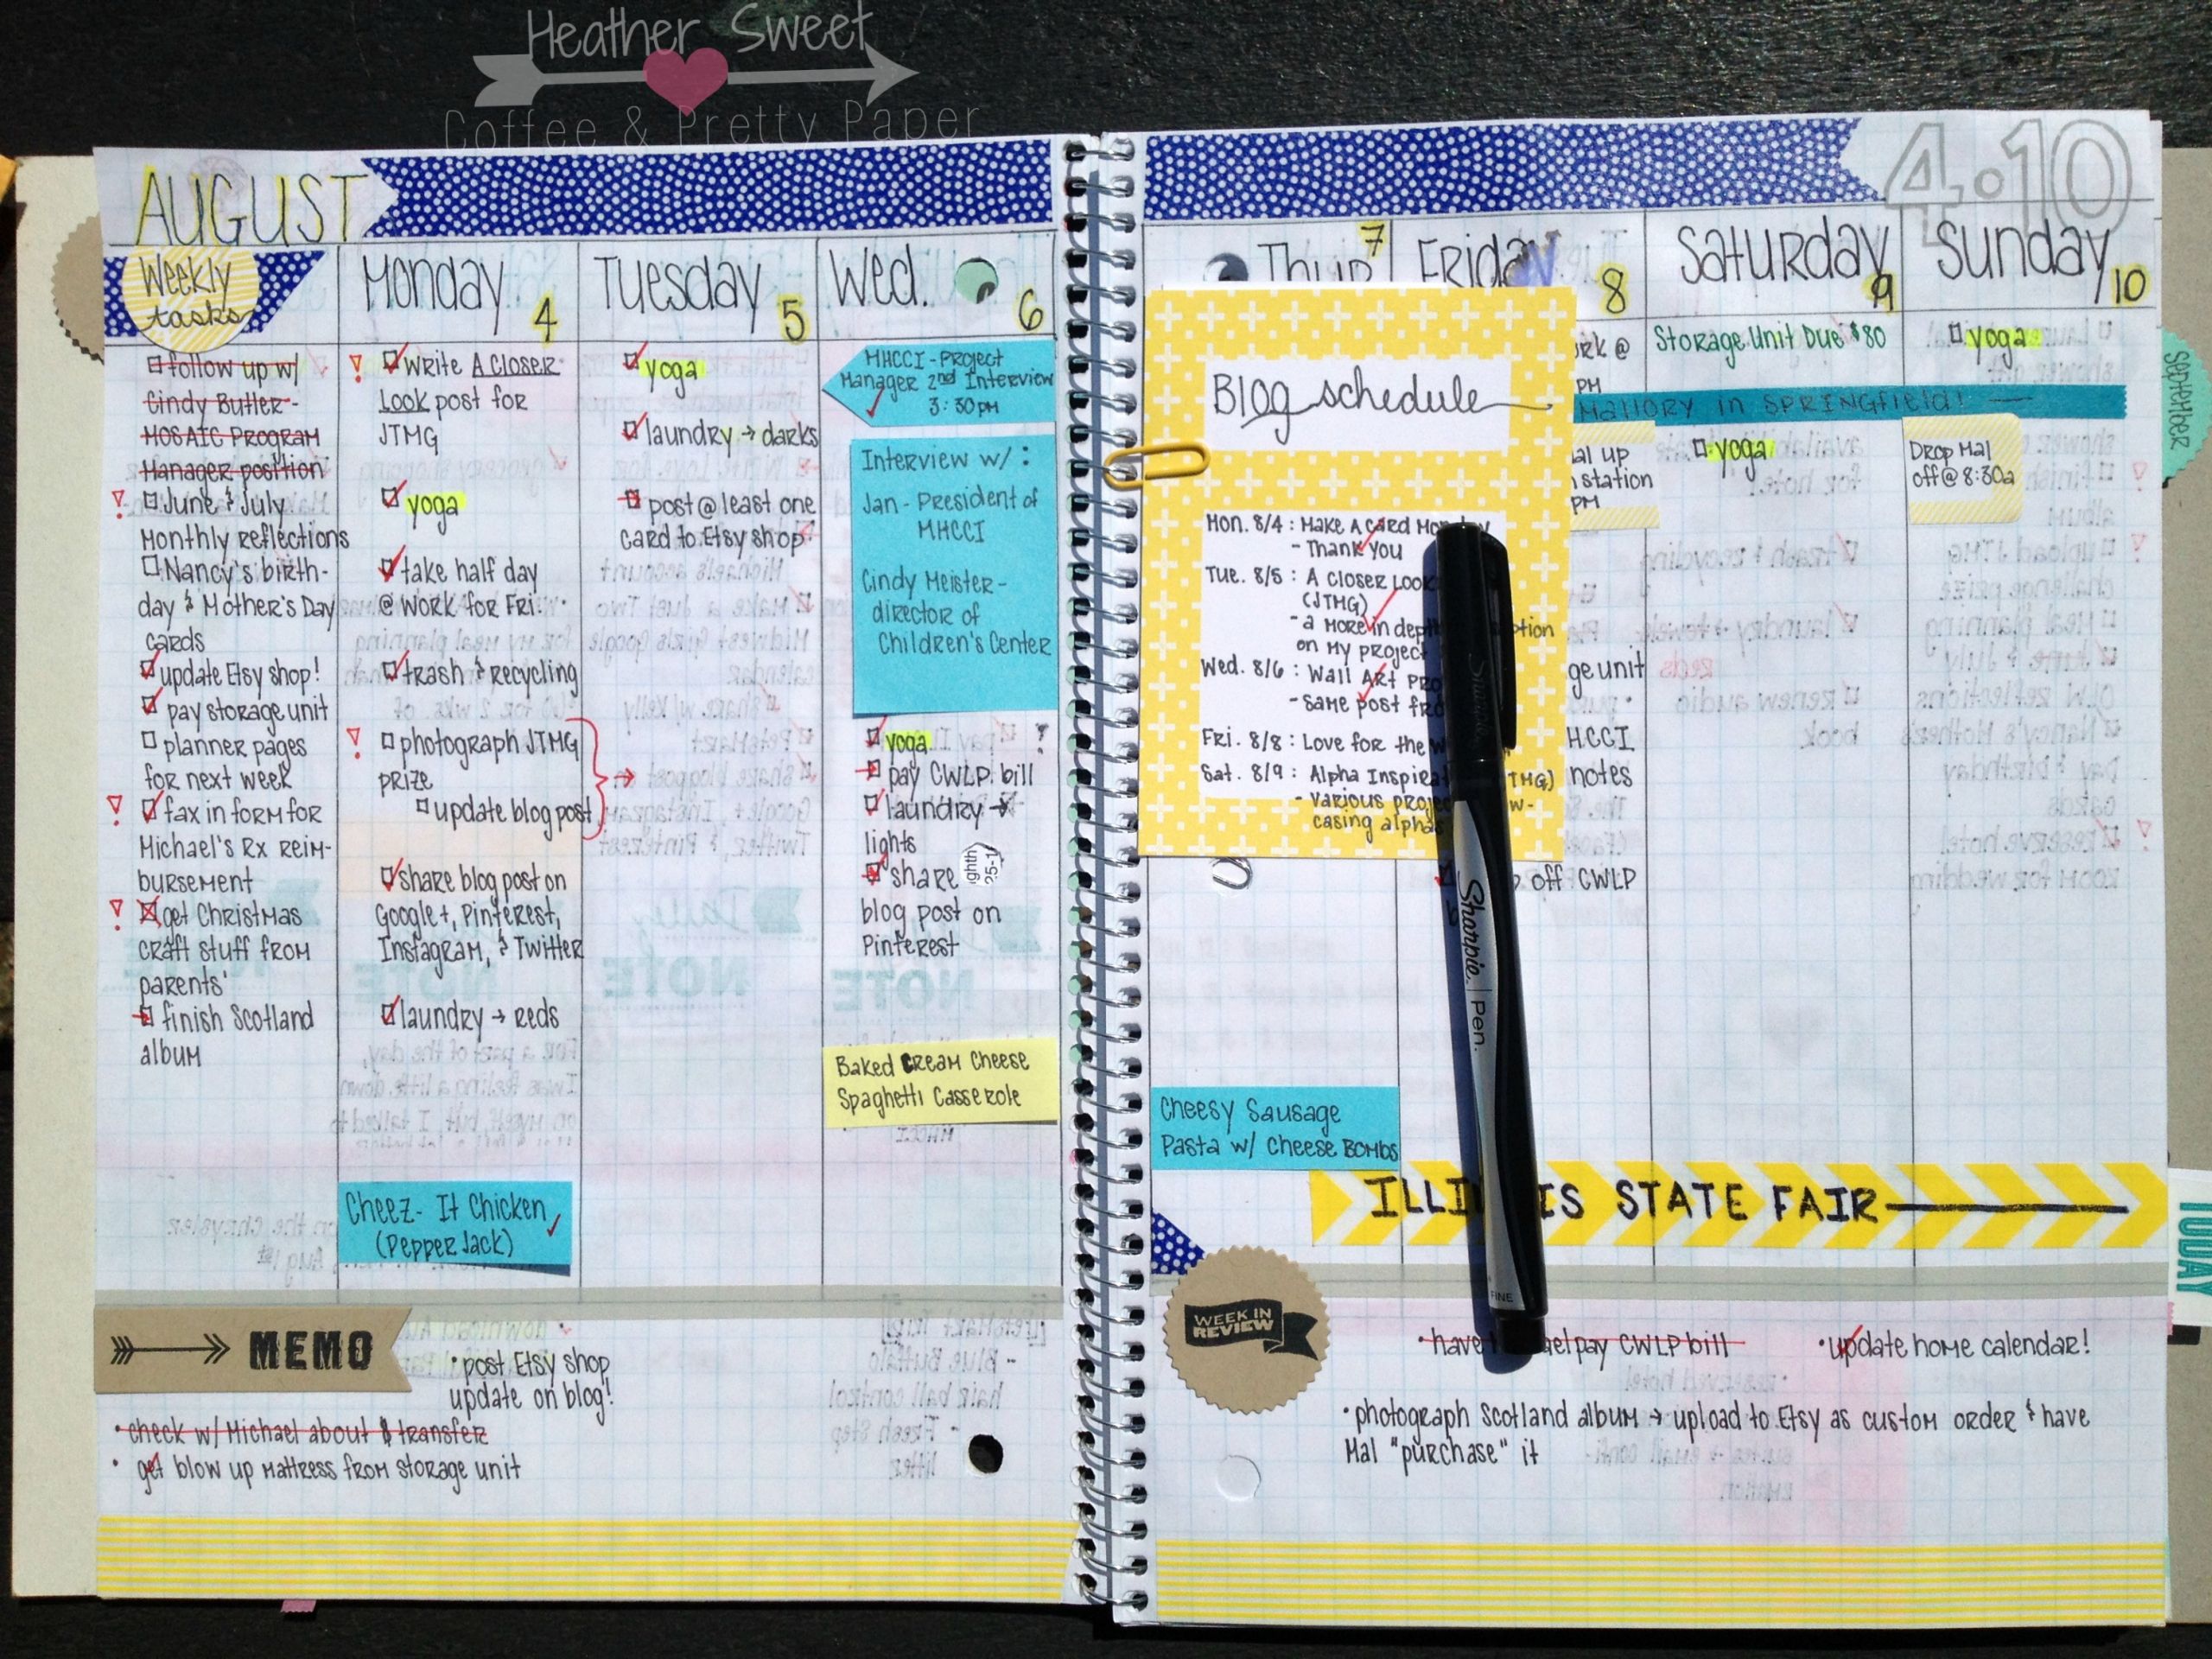 DIY Planner From Notebook
 Coffee and Pretty Paper My DIY Planner